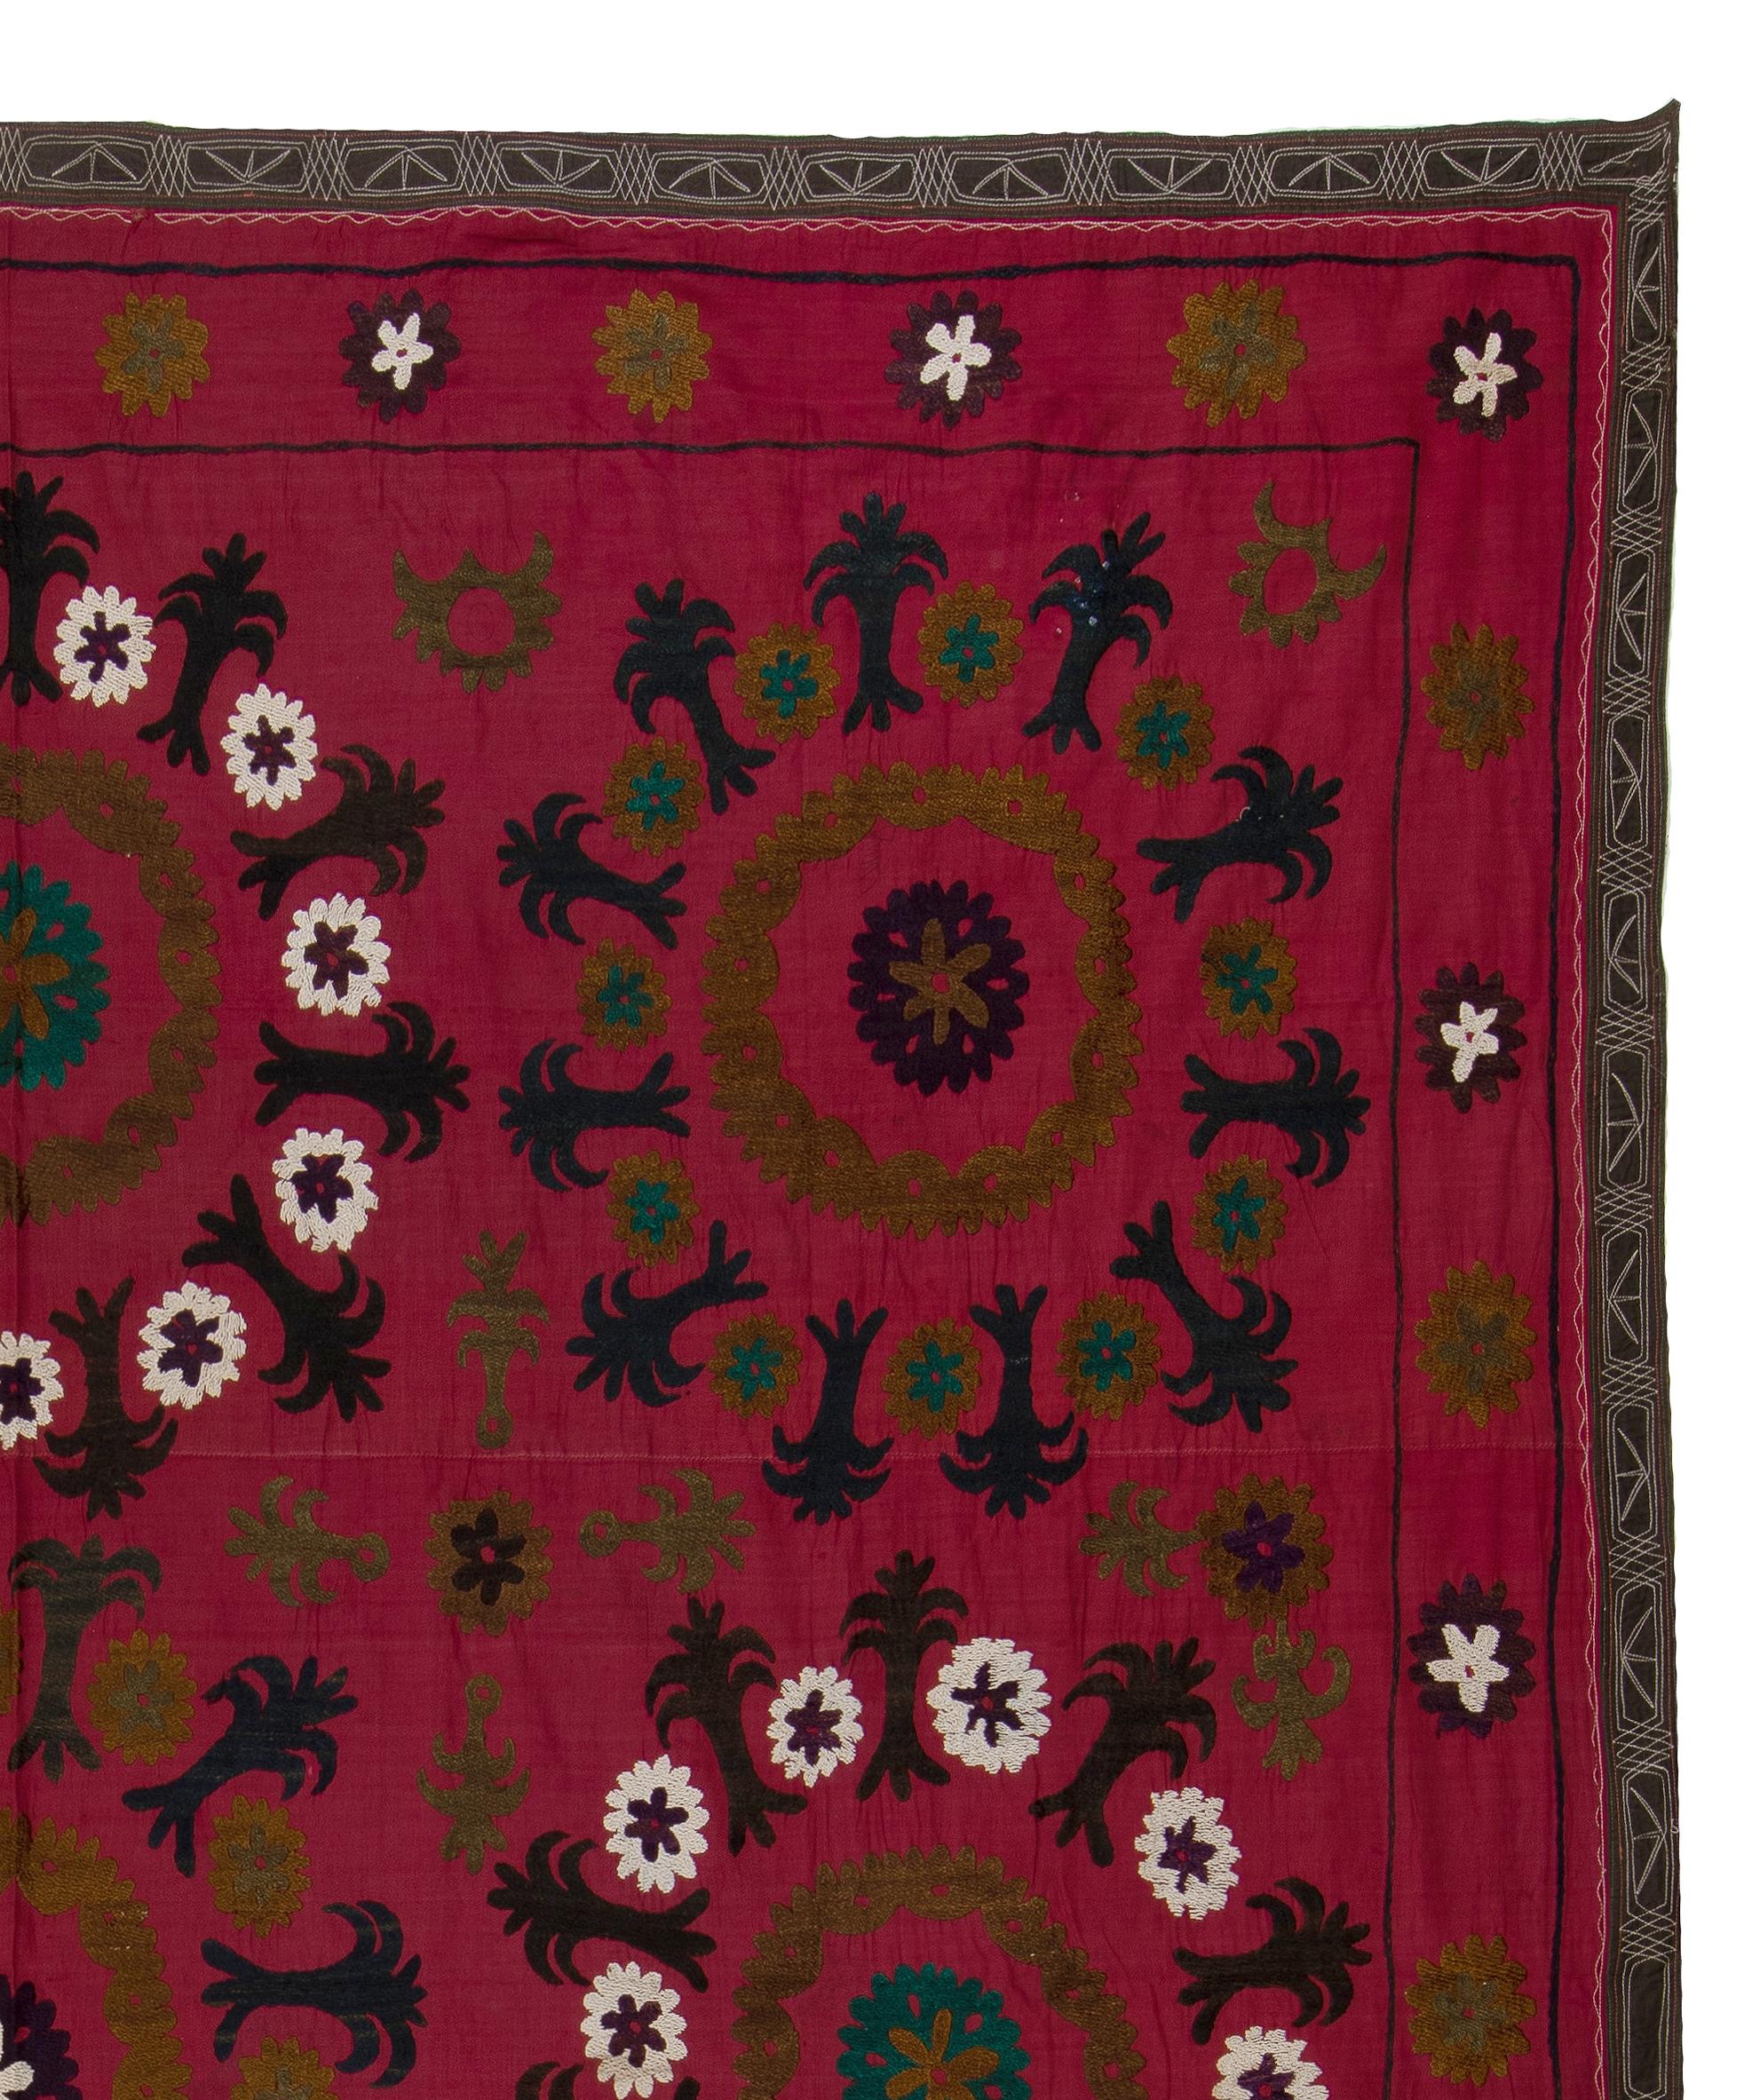 Uzbek 7x7.4 Ft Central Asian Suzani Textile, Embroidered Cotton & Silk Wall Hanging For Sale